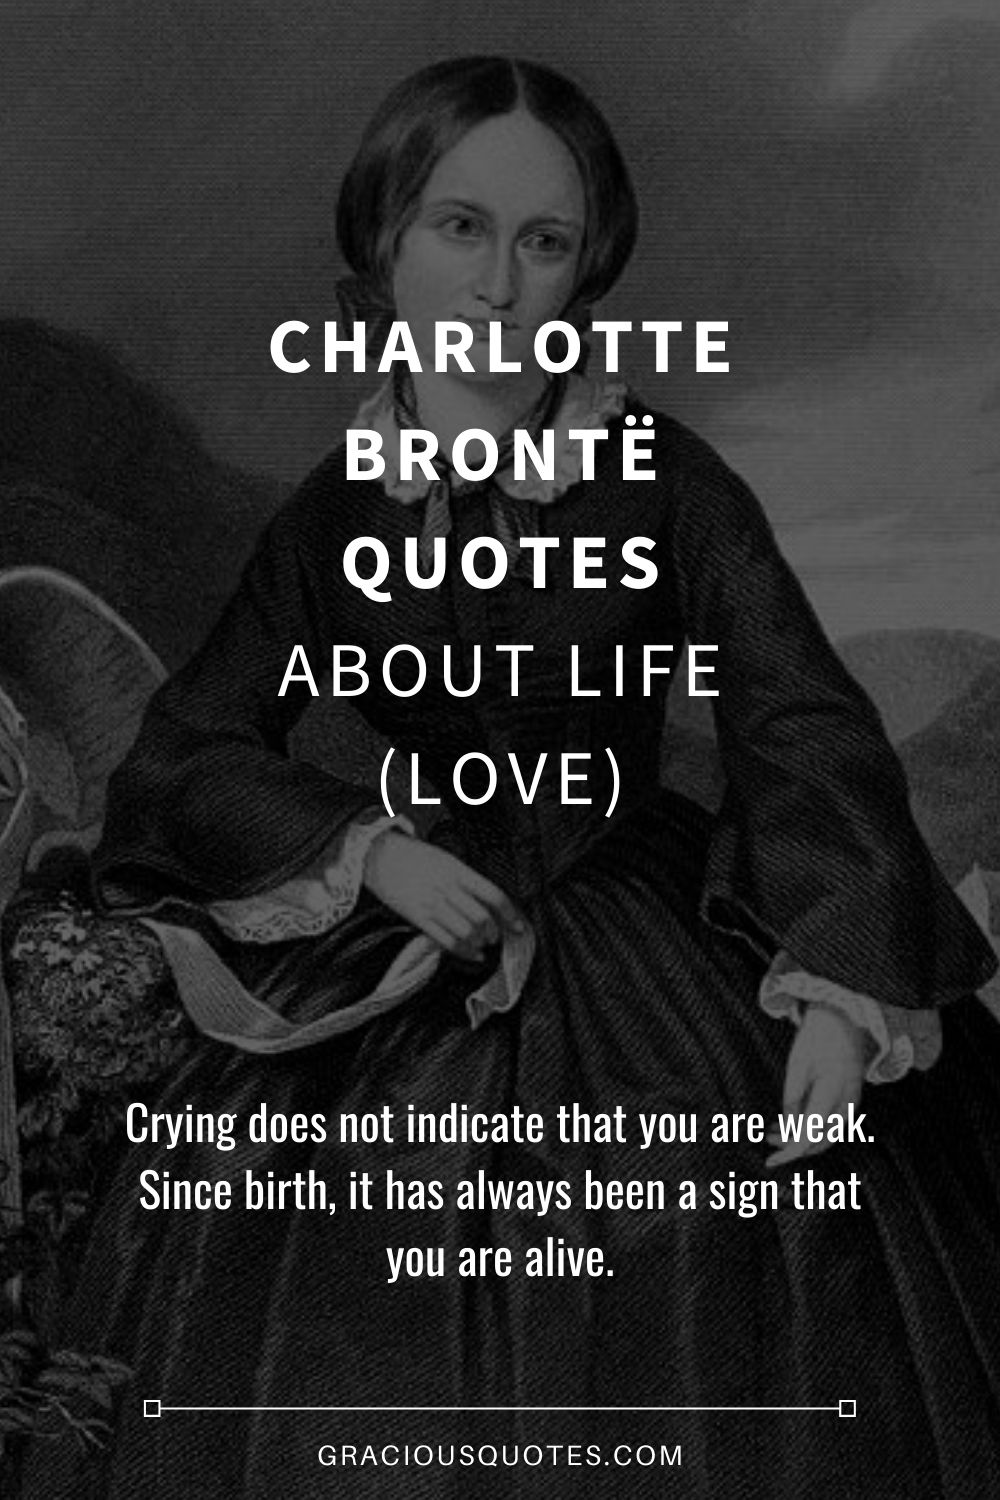 Charlotte Brontë Quotes About Life (LOVE) - Gracious Quotes